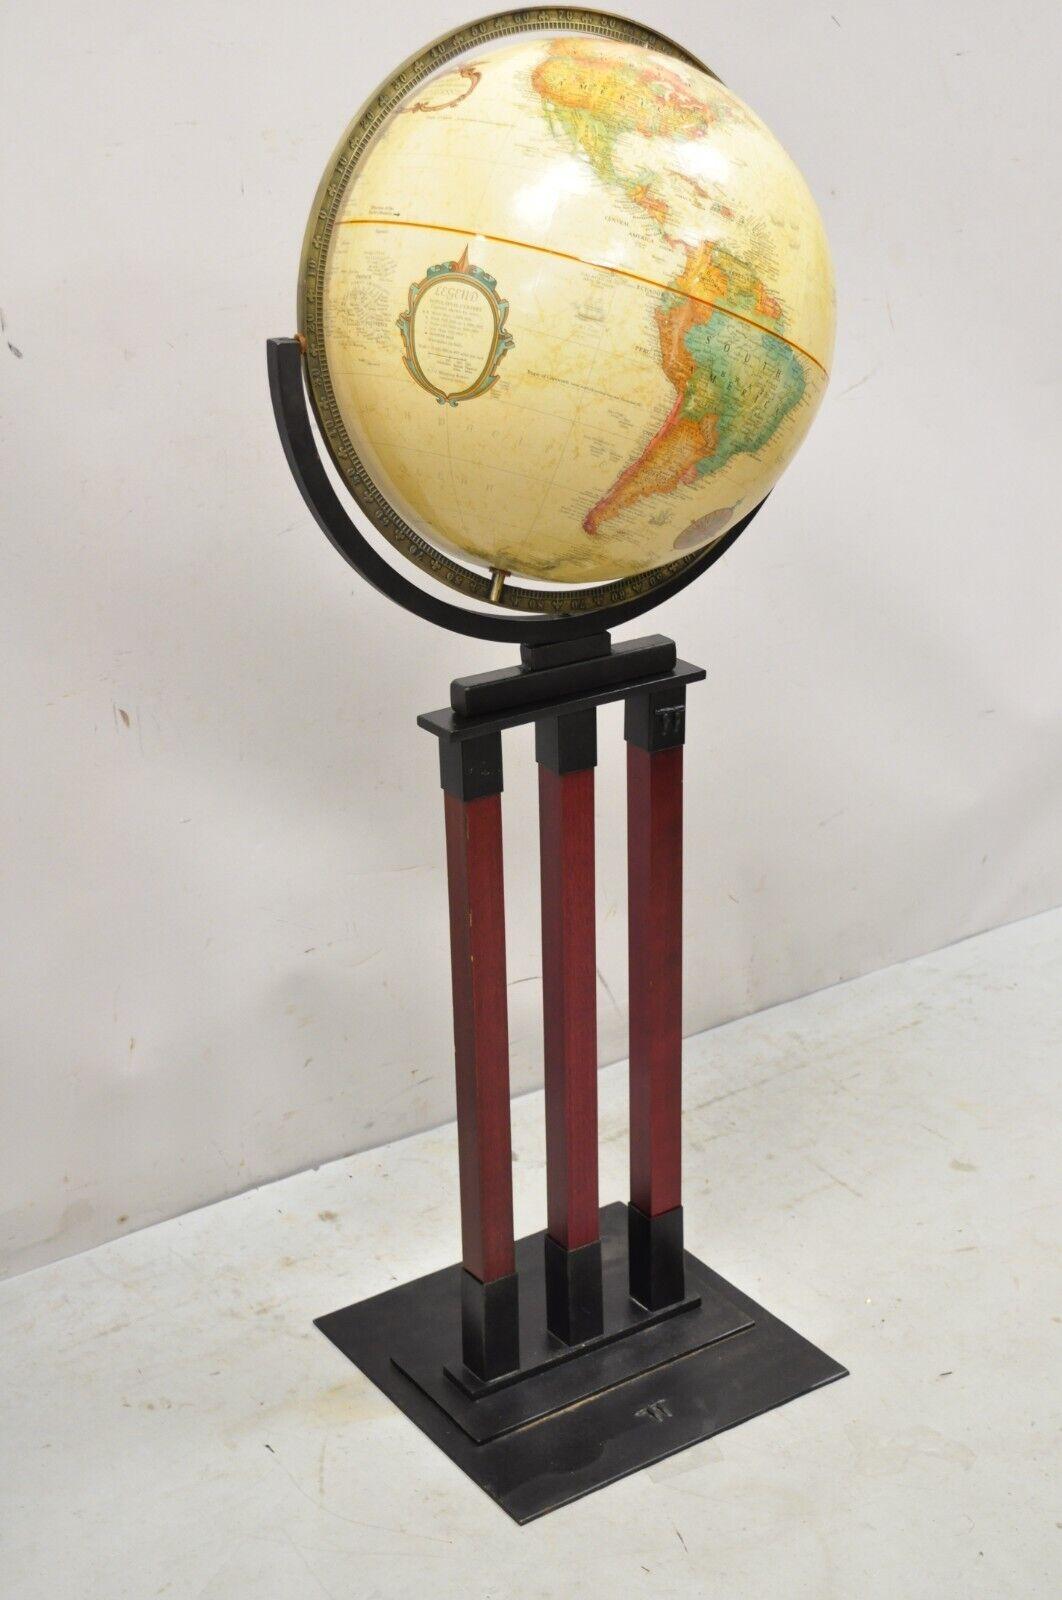 Replogle 16 inch diameter globe on stand world classic series standing. Item features a heavy iron base and frame, wooden accents, fiberglass globe, very nice item, great style and form. Circa Late 20th Century.
Measurements: 
Overall: 47